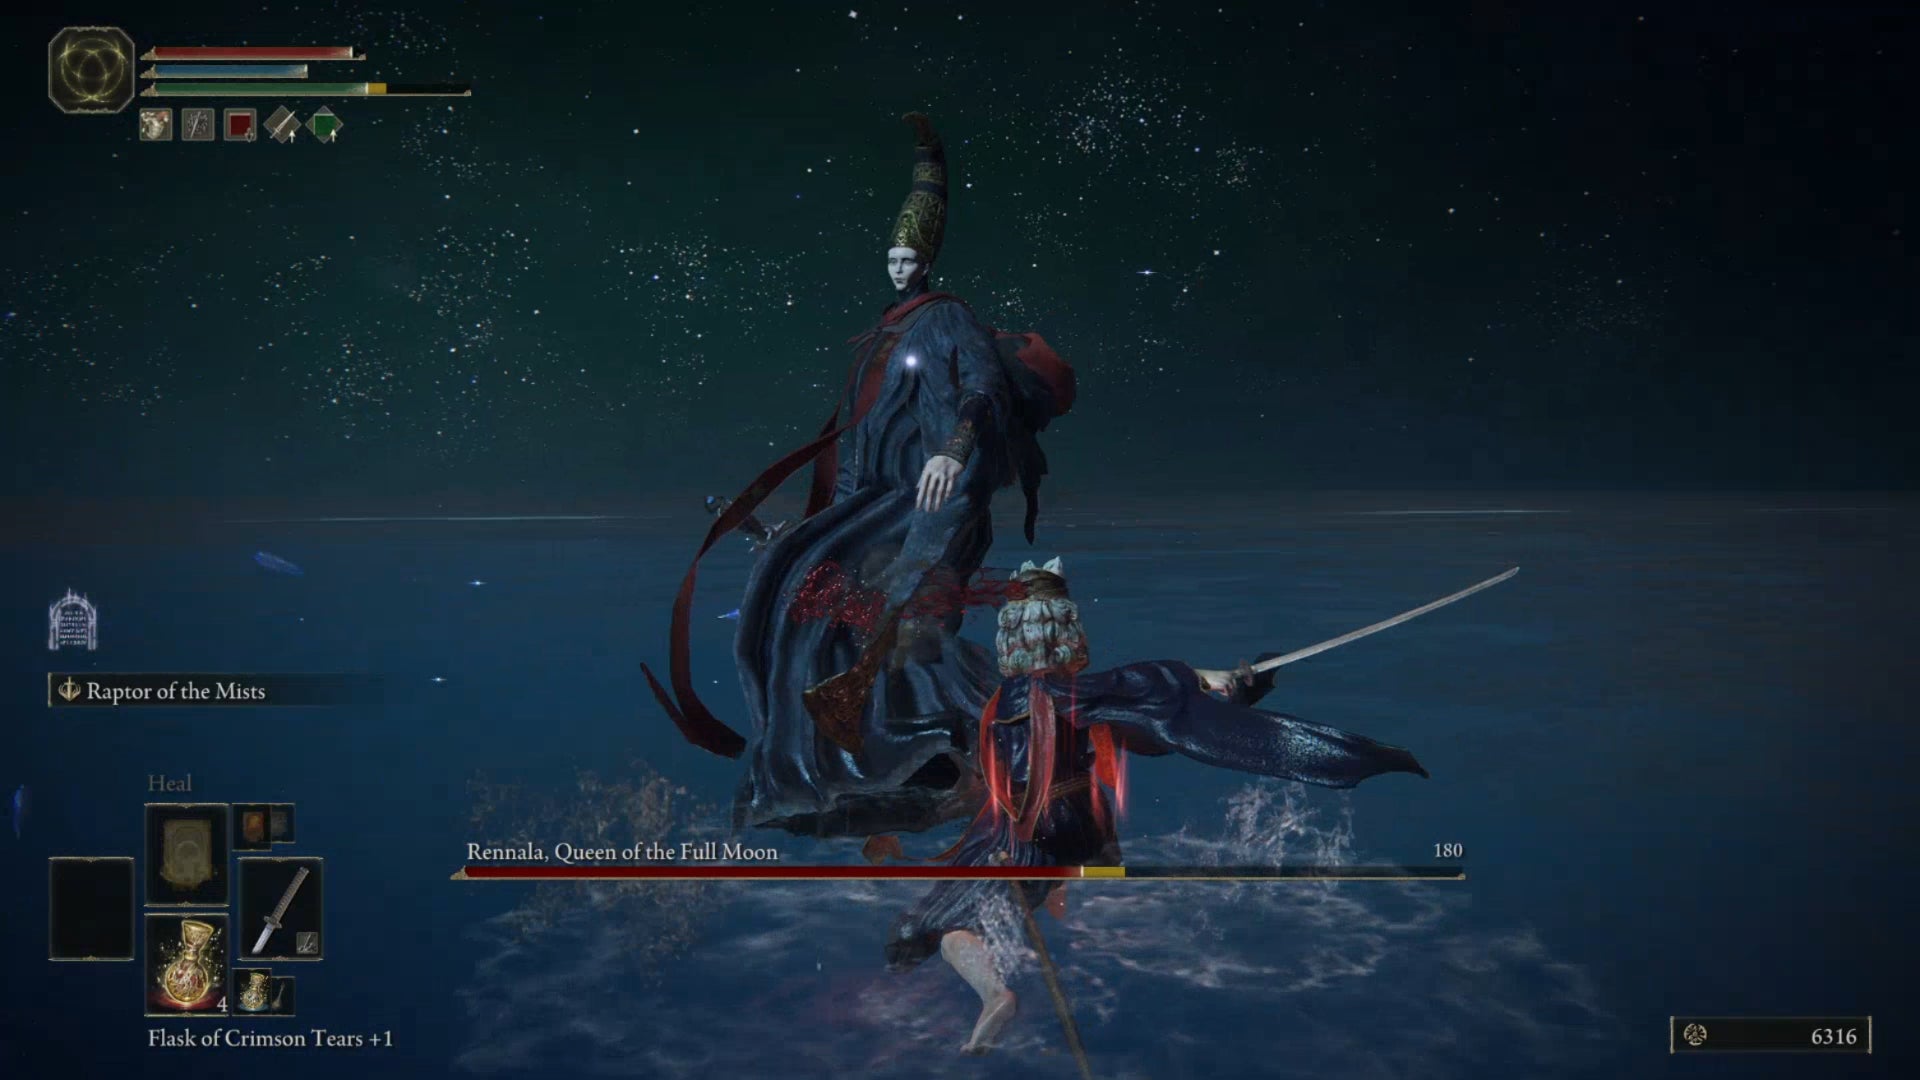 A screenshot from the second phase of the Rennala boss fight in Elden Ring. The player crouches and slashes with a katana towards Rennala.